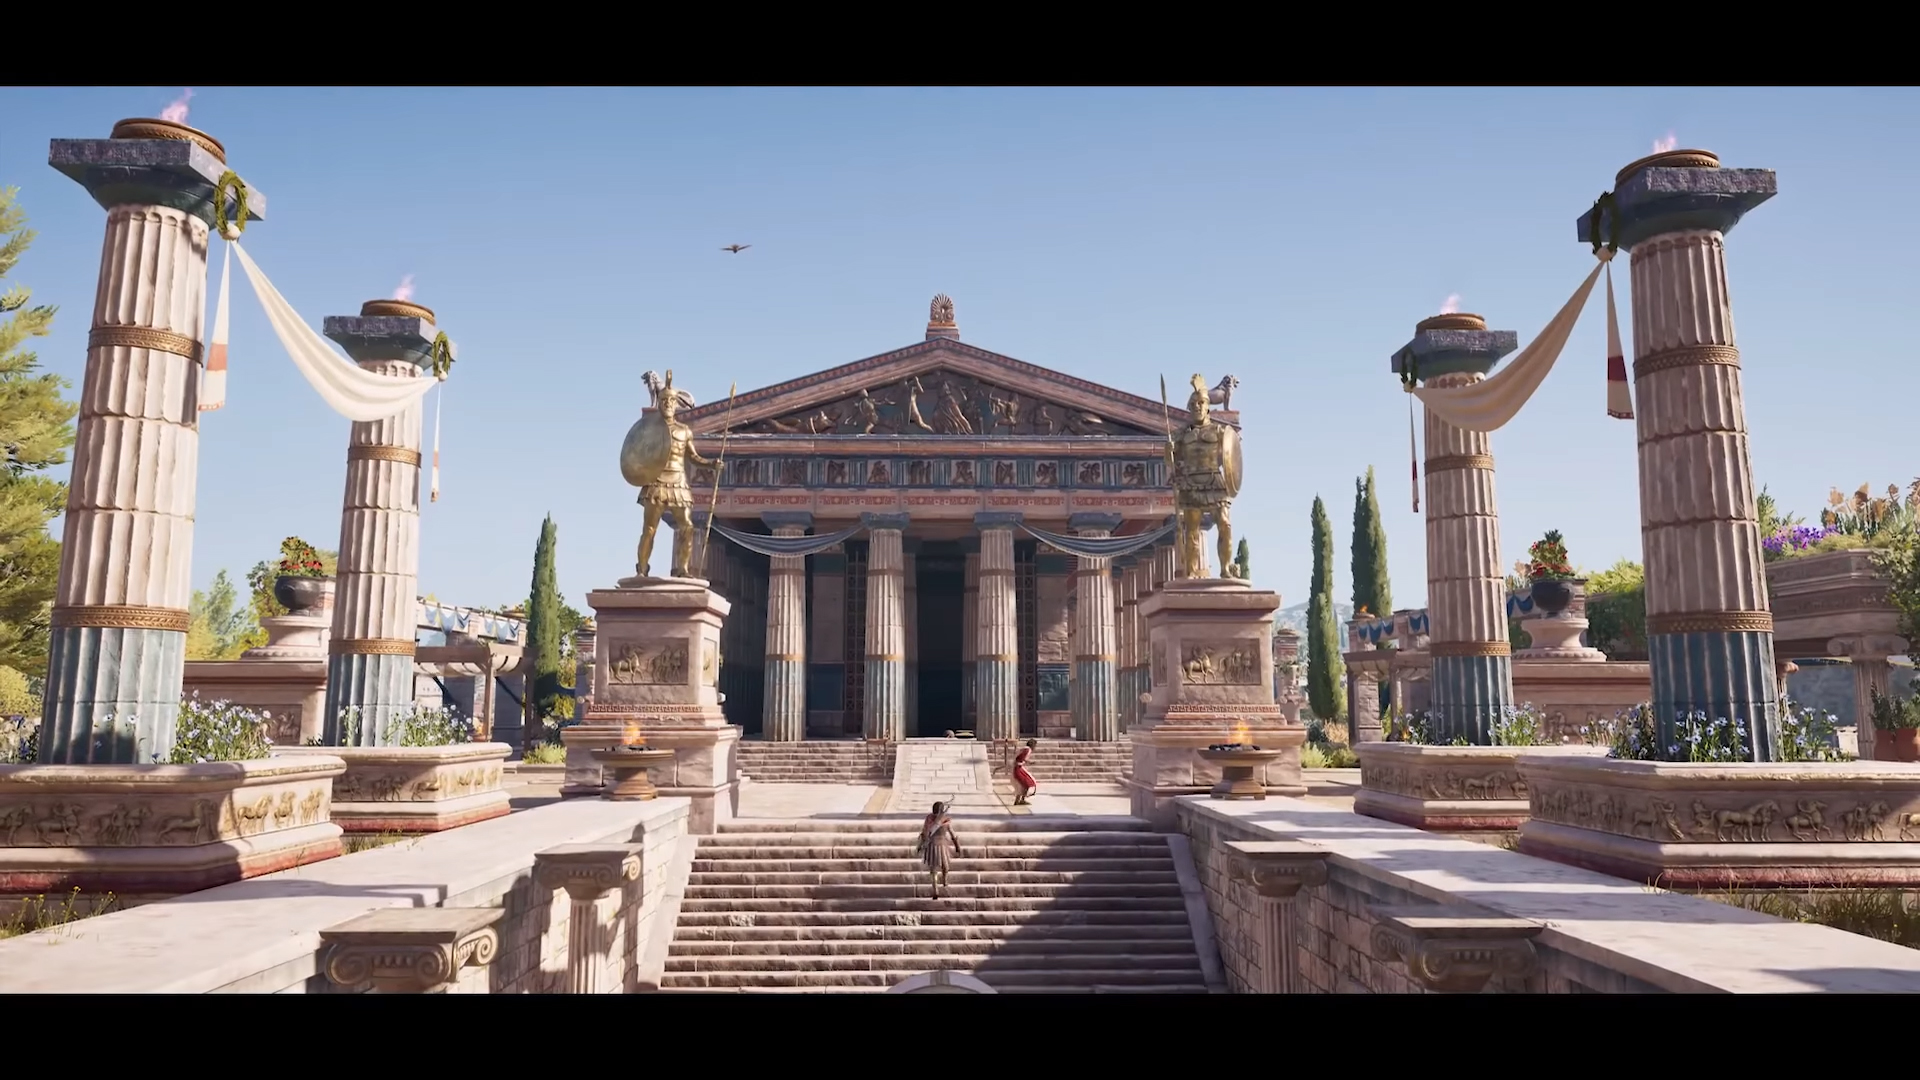 assassin-s-creed-odyssey-s-athens-will-feel-much-like-the-real-one